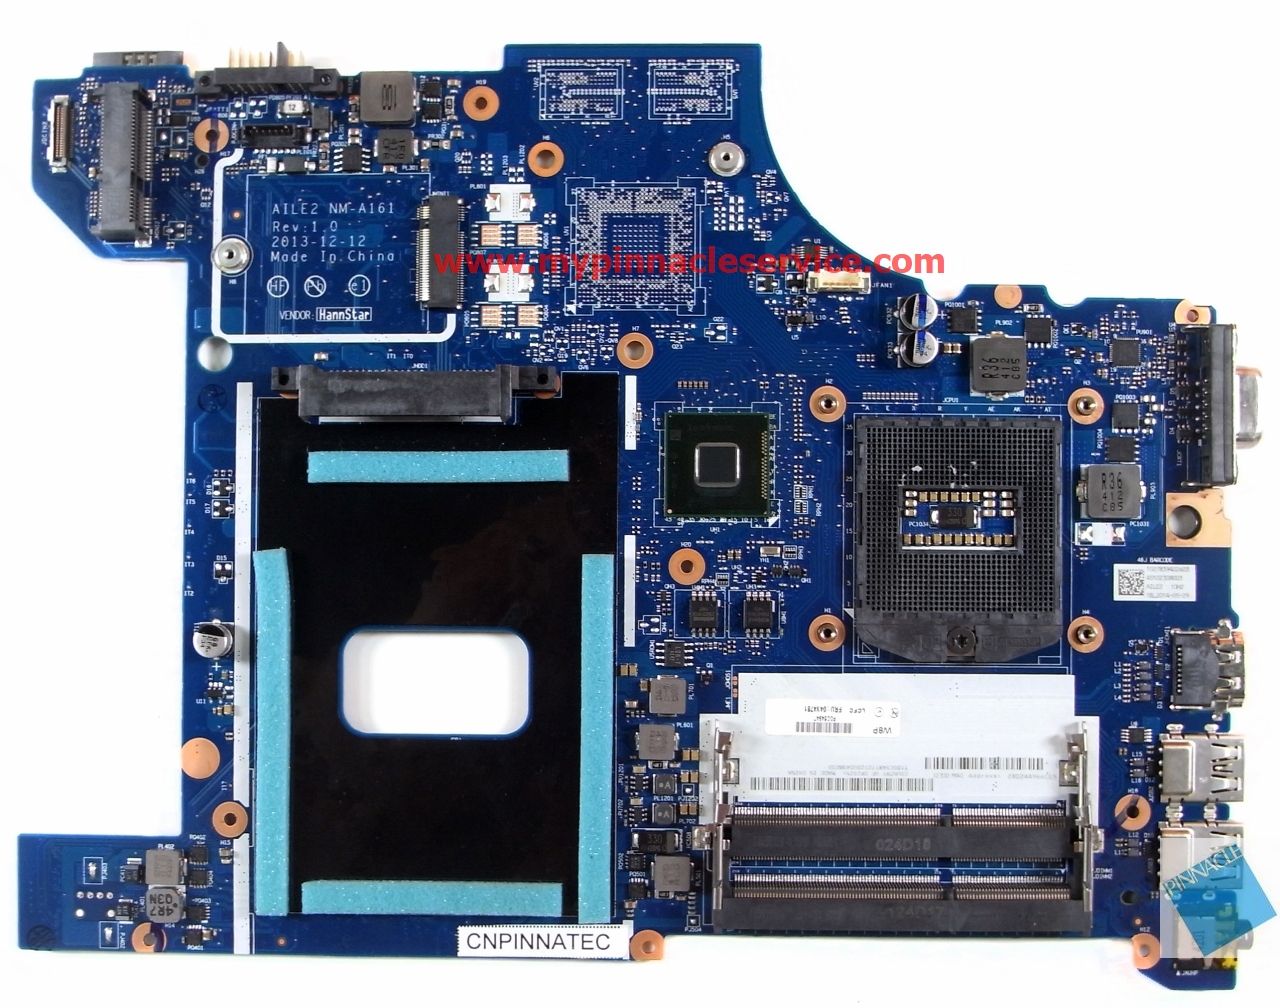 fru-04x4781-motherboard-for-lenovo-e540-motherboard-aile2-nm-a161-rimg0129.jpg